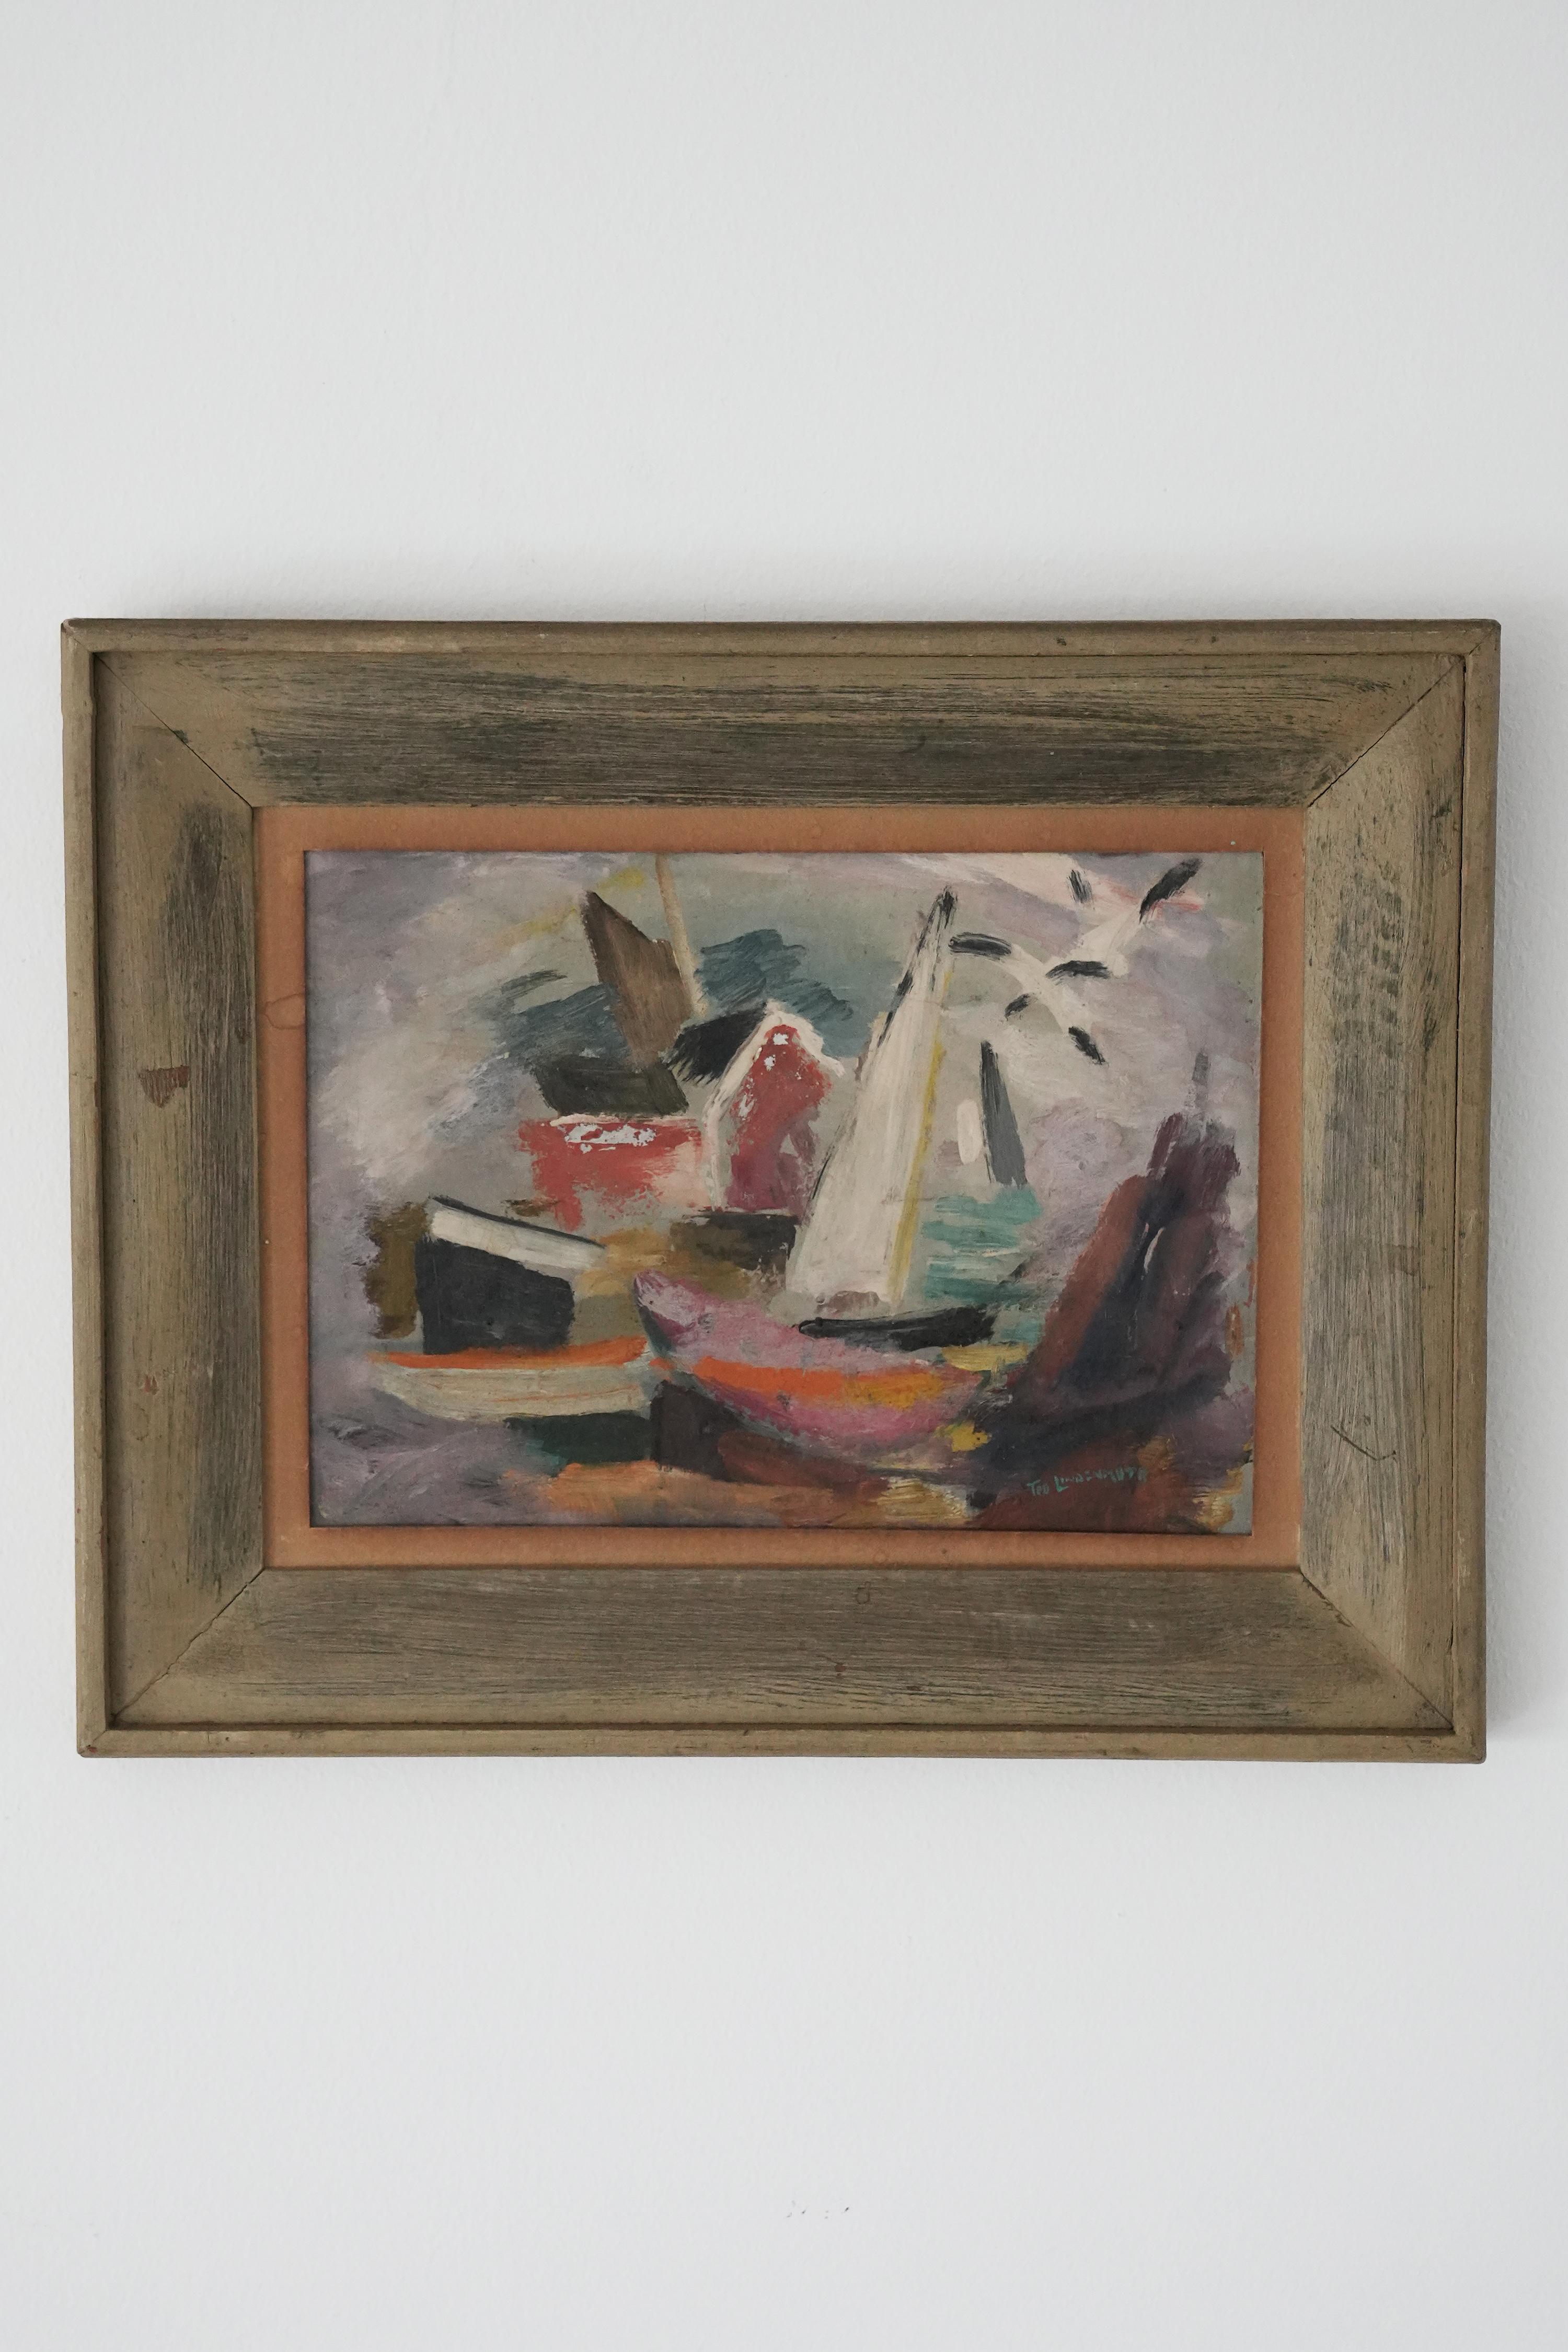 This is a semi-abstract painting of a harbor scene featuring a pair of seagulls and pink sailboat by abstract expressionist artist Tod Lindenmuth (1885-1976) Lindenmuth, born in Provincetown and the founder of Provincetown Art Association, was most